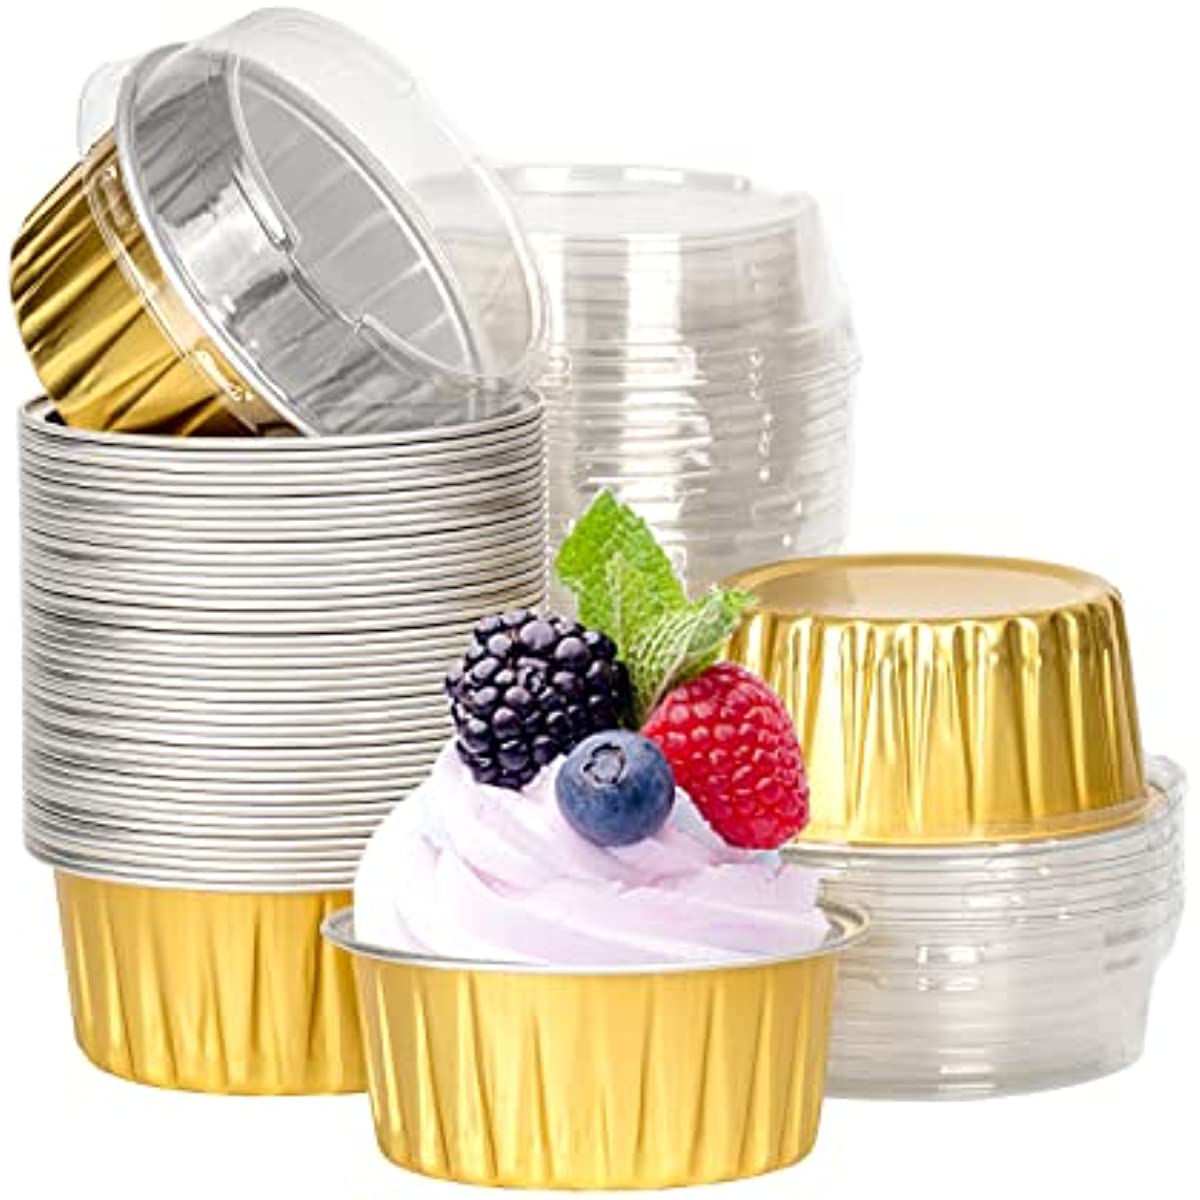 100pcs 5oz Aluminum Muffin Cups with Lid, Muffin Liners Cups with